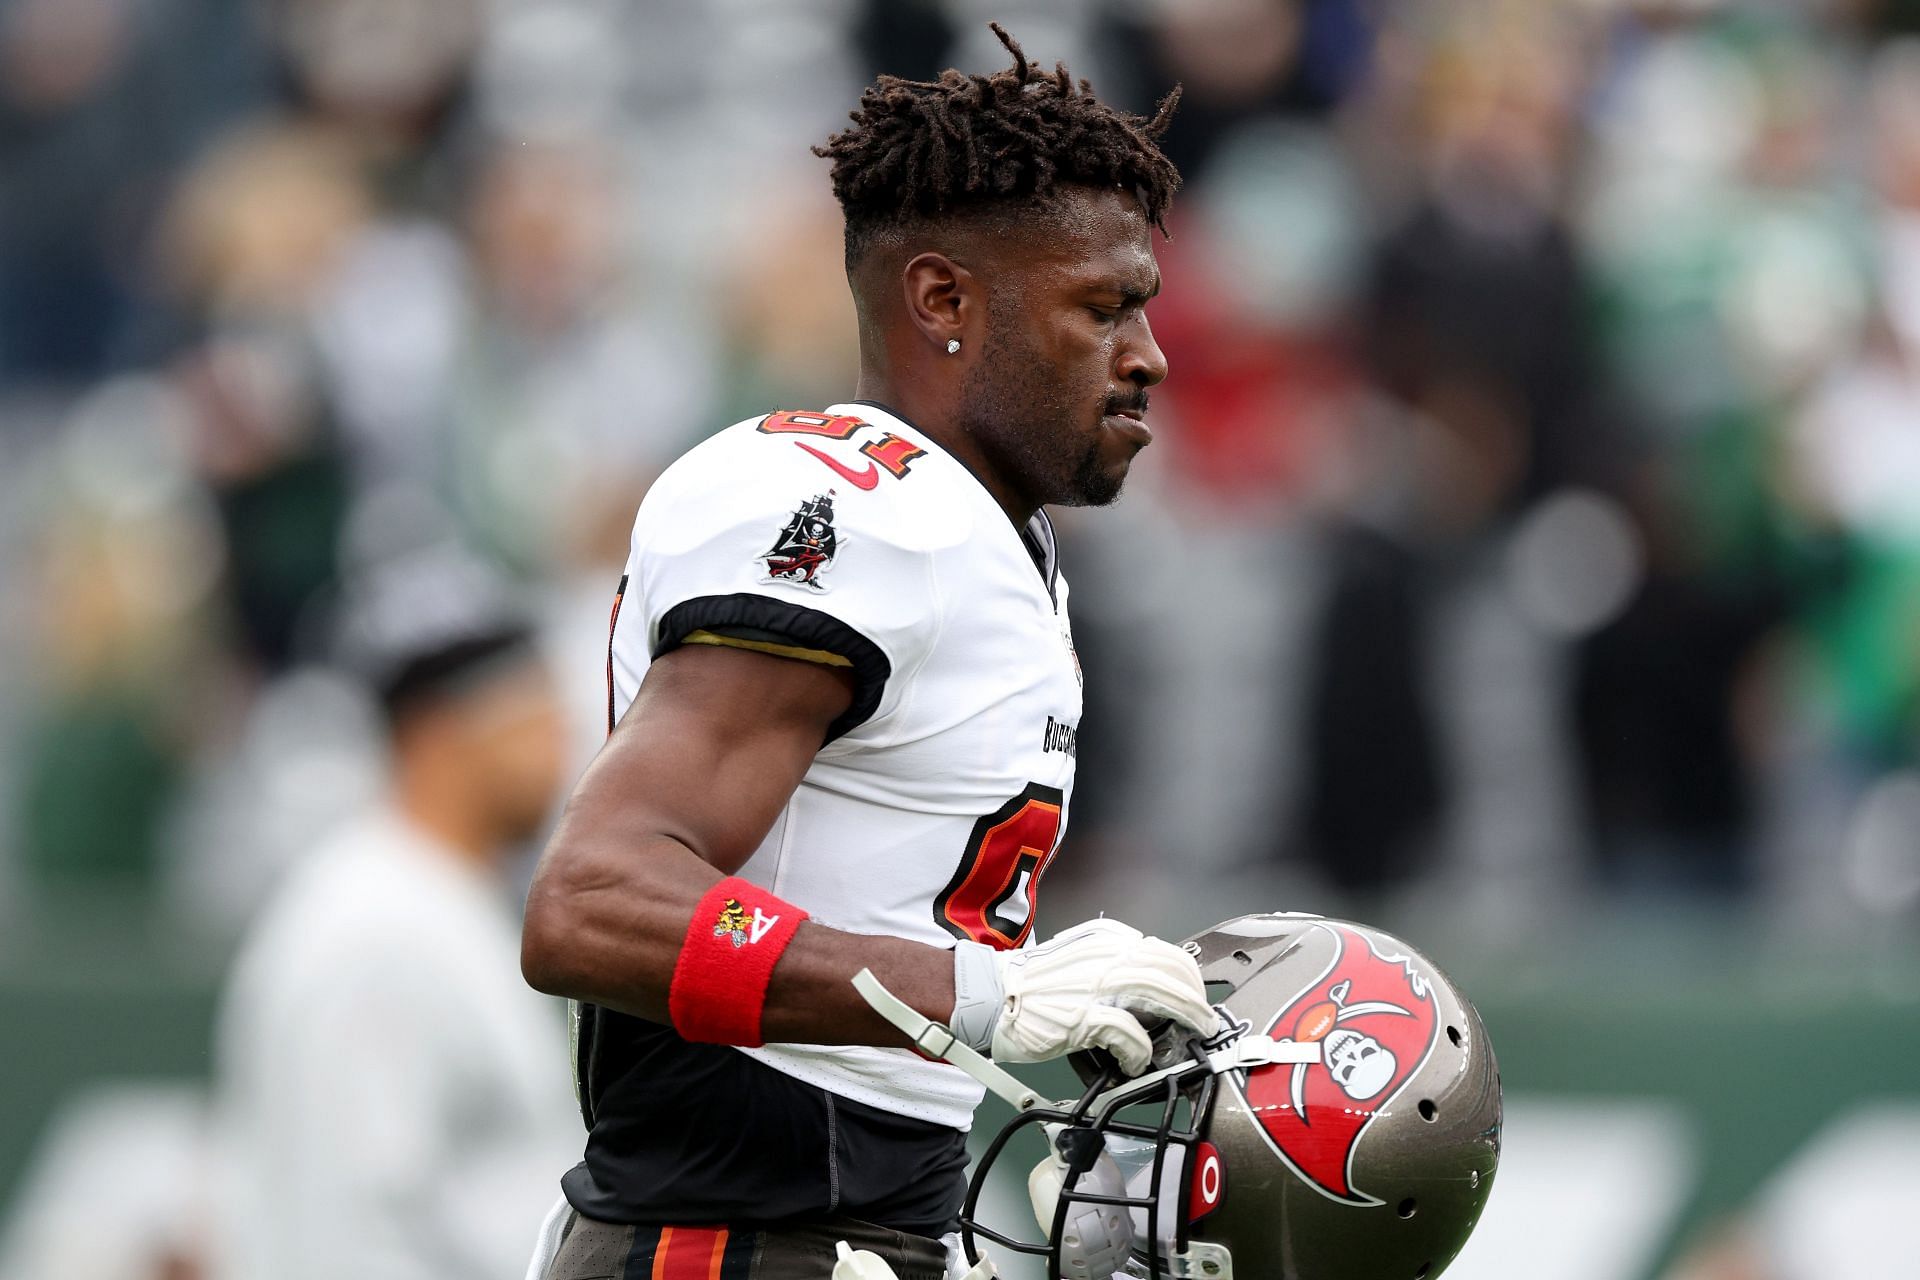 Antonio Brown was seen leaving the Tampa Bay Buccaneers v New York Jets game